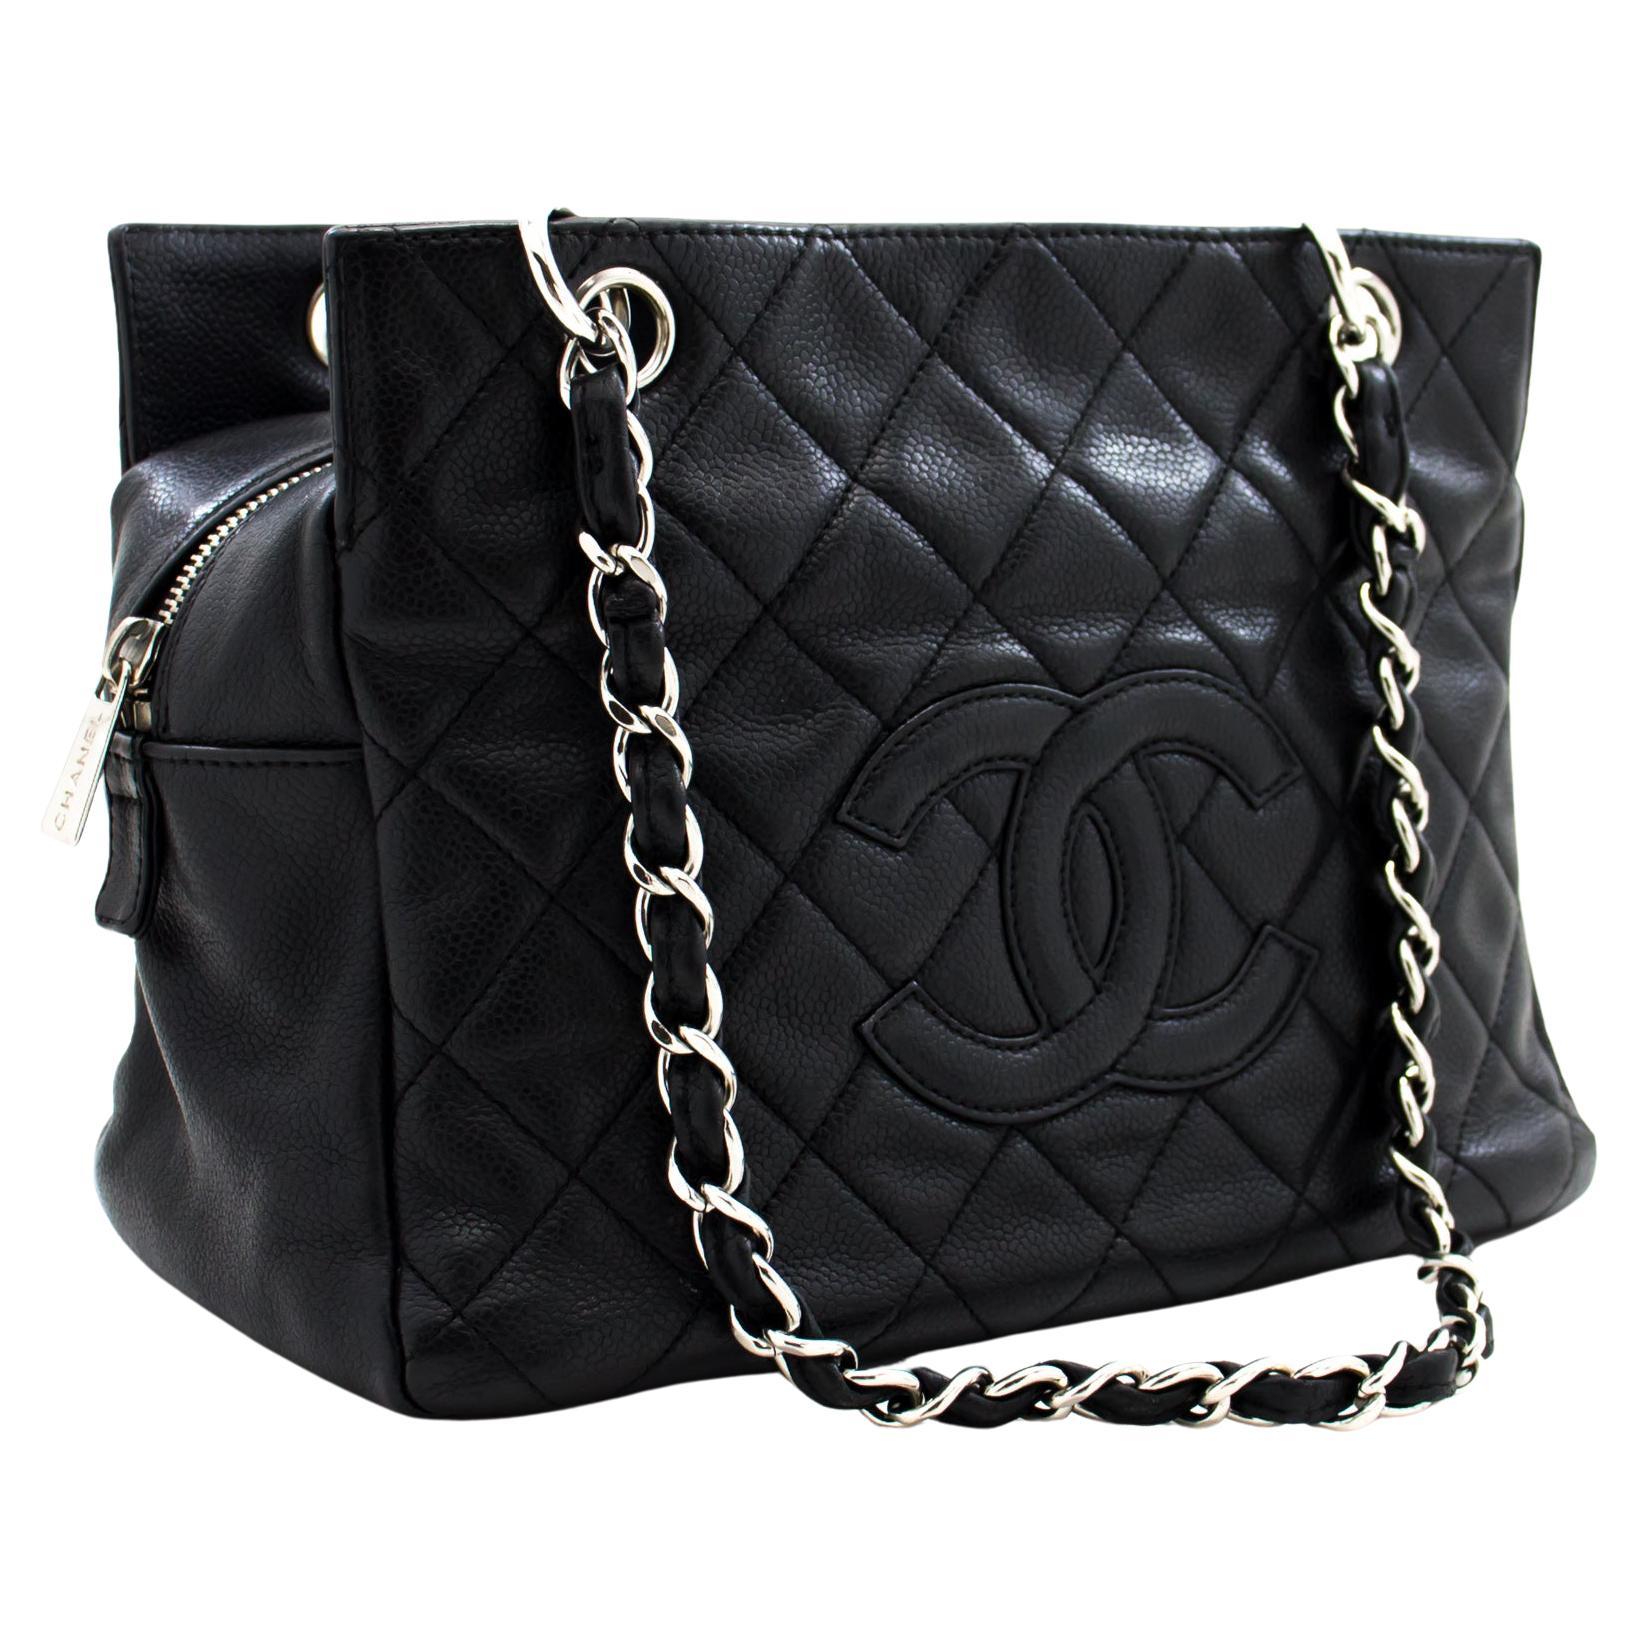 CHANEL Caviar Chain Shoulder Shopping Tote Bag Black Quilted